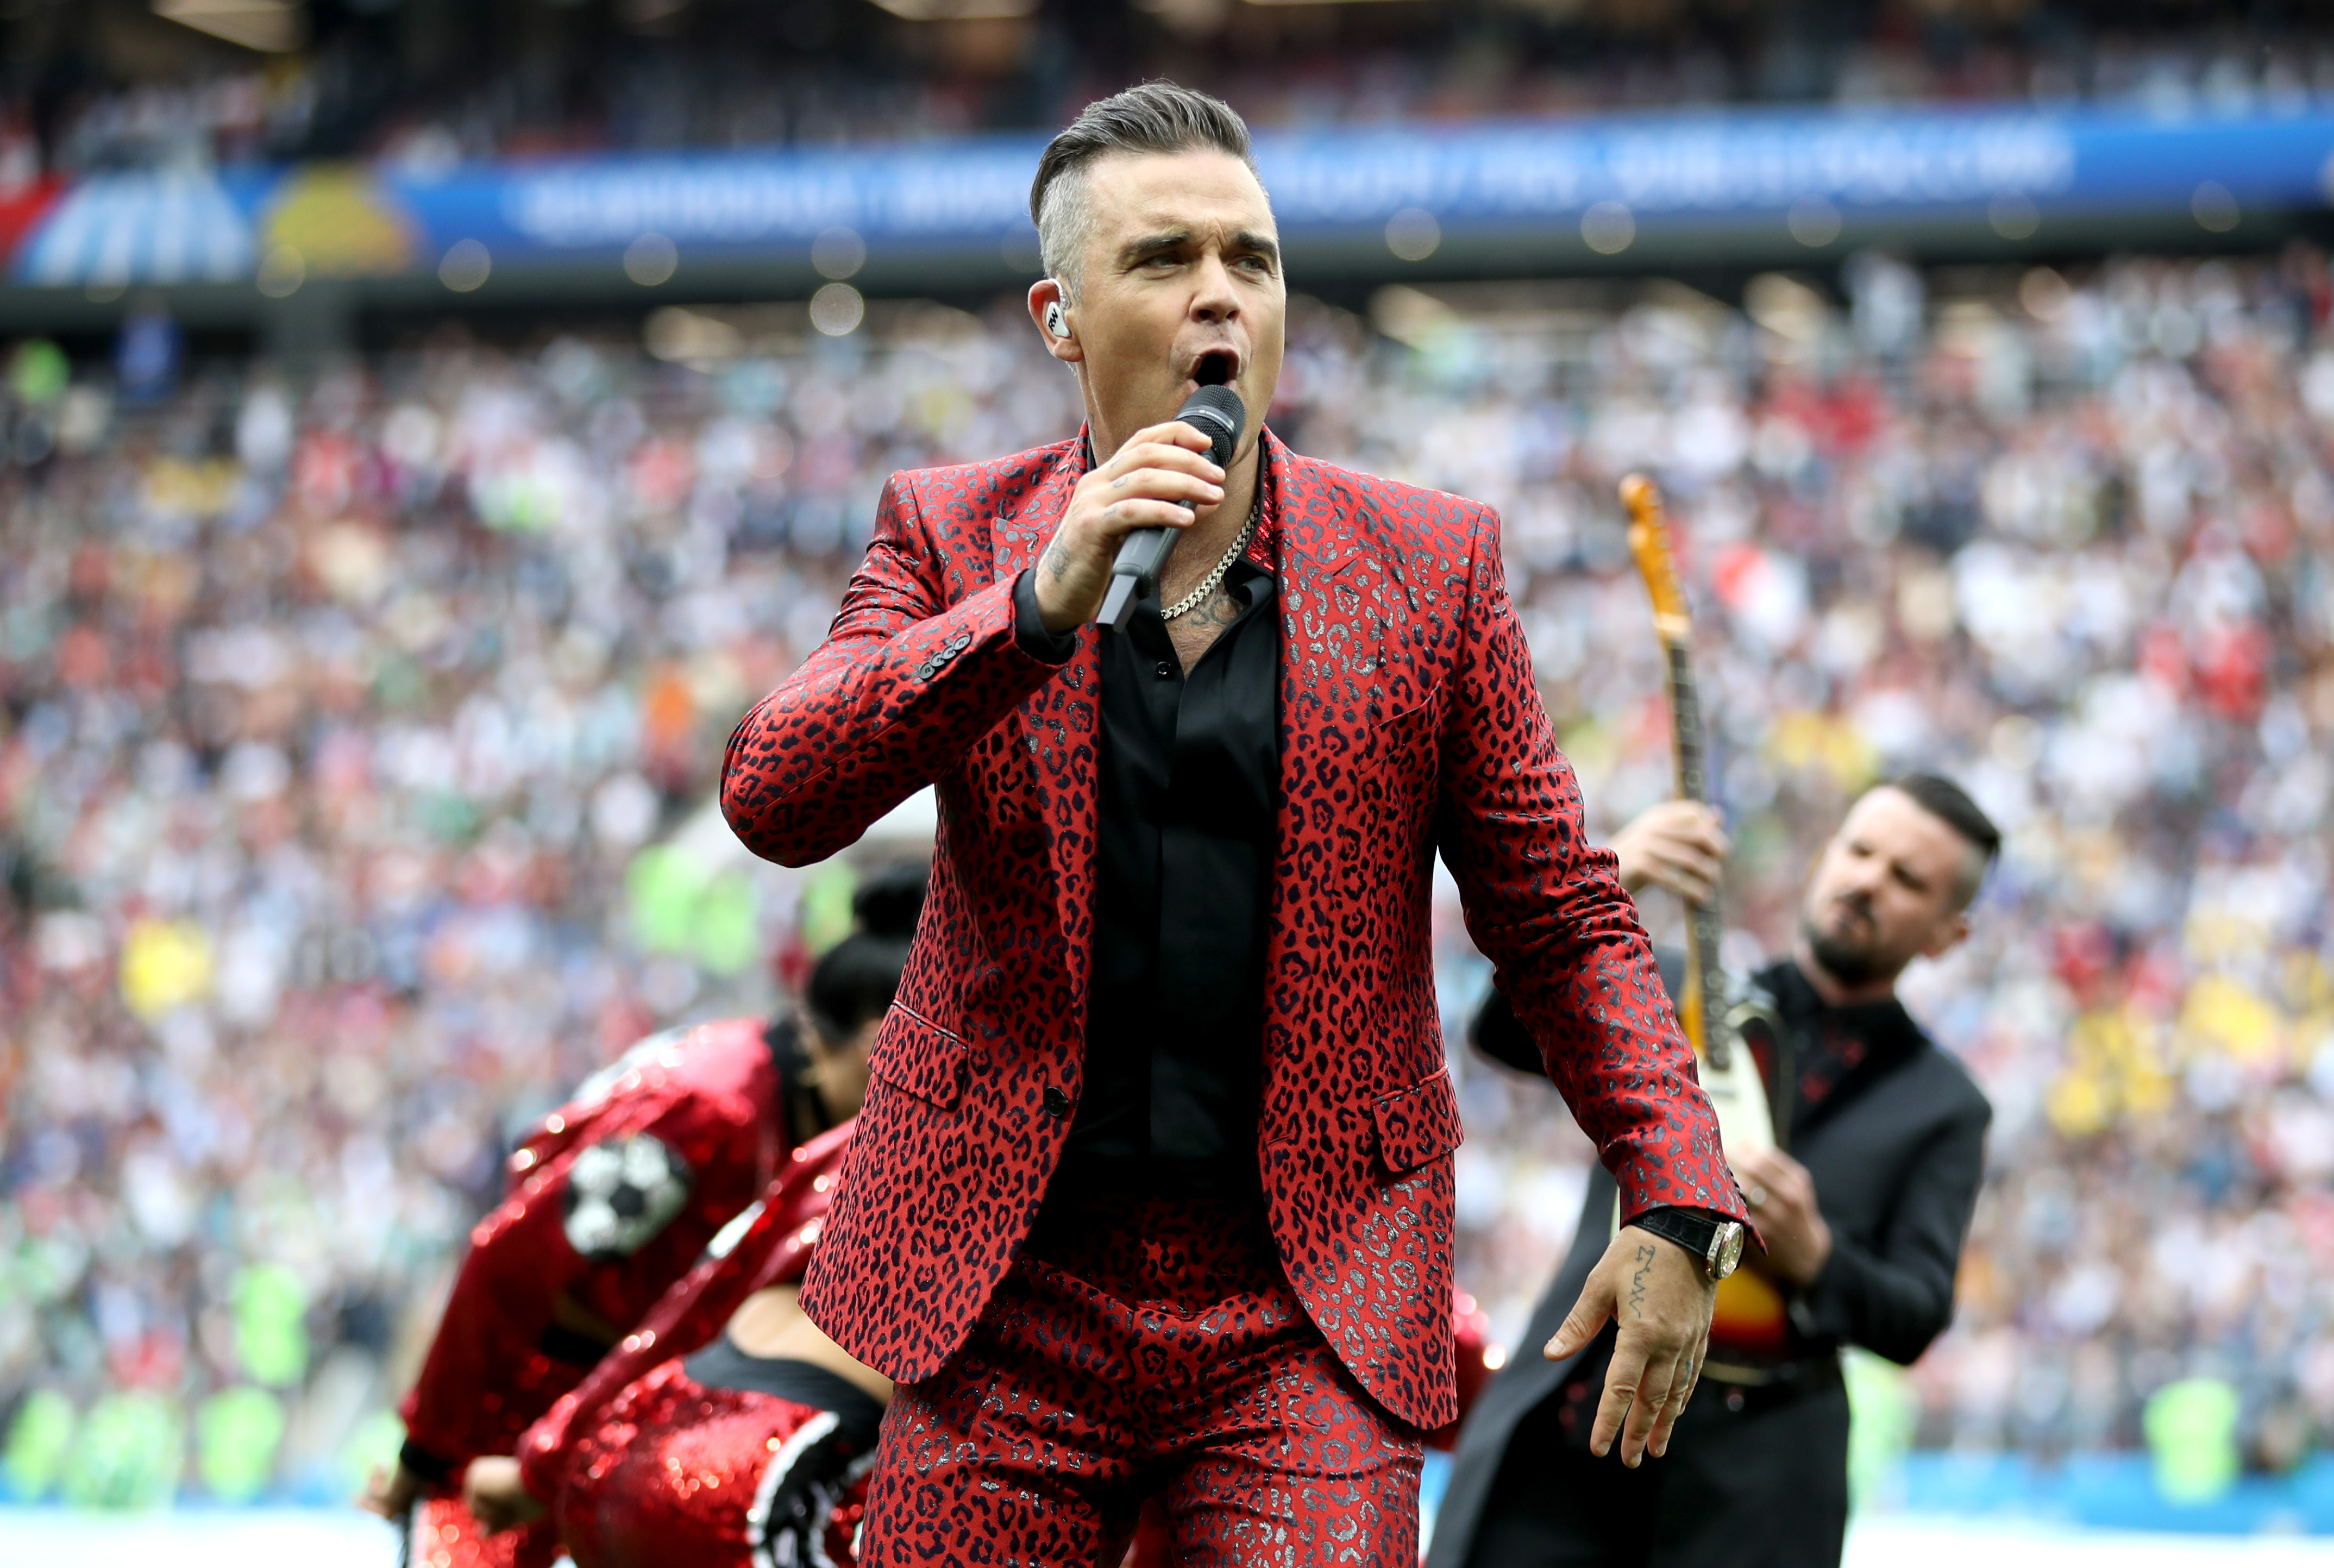 tankskib brydning udvikle World Cup Performer Robbie Williams Made Quite a Statement | Time